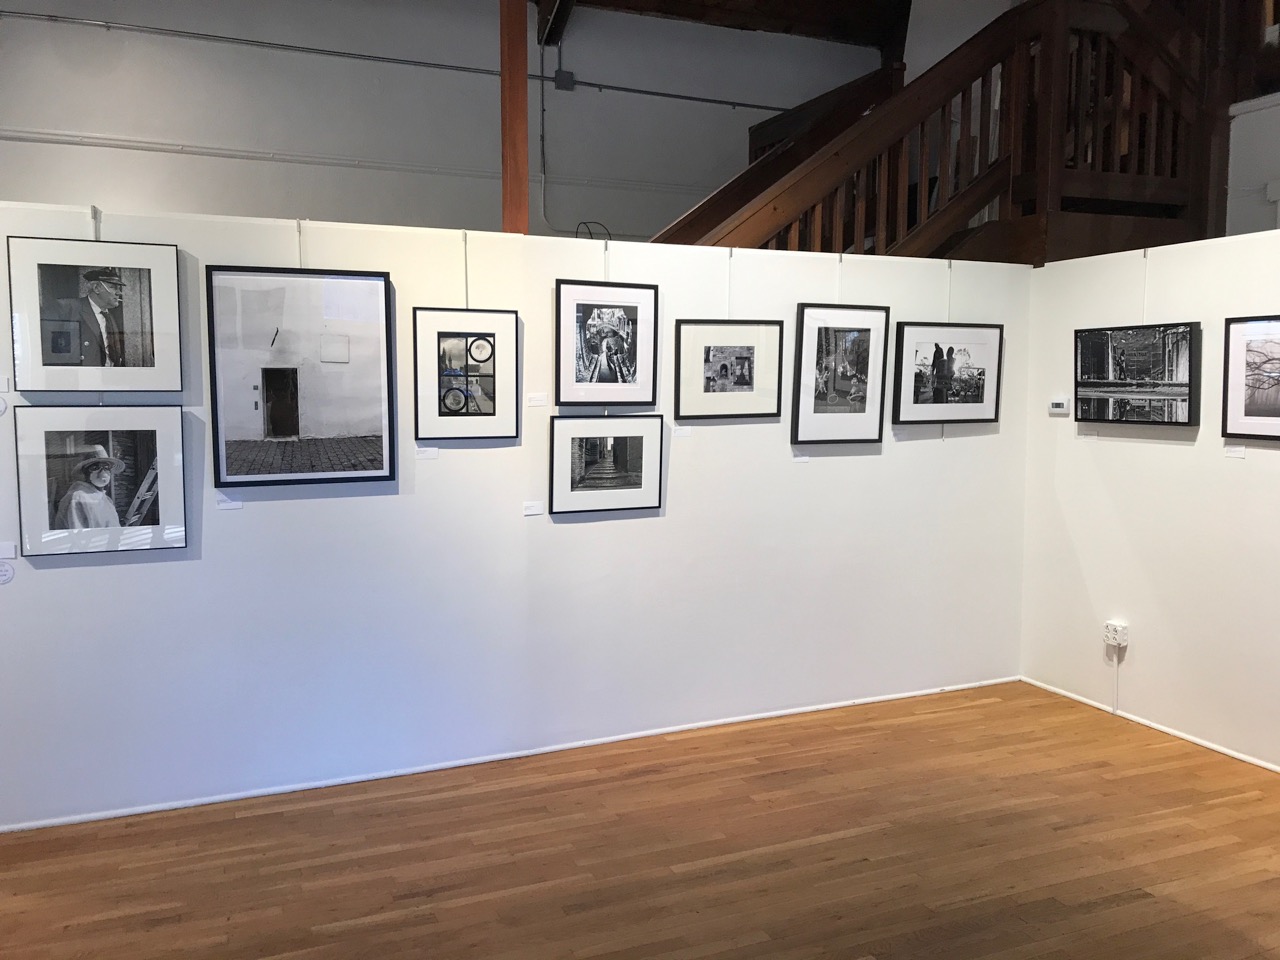 Allison Brant on Jury Panel for the Carriage Barn's 38th Annual Photography Show